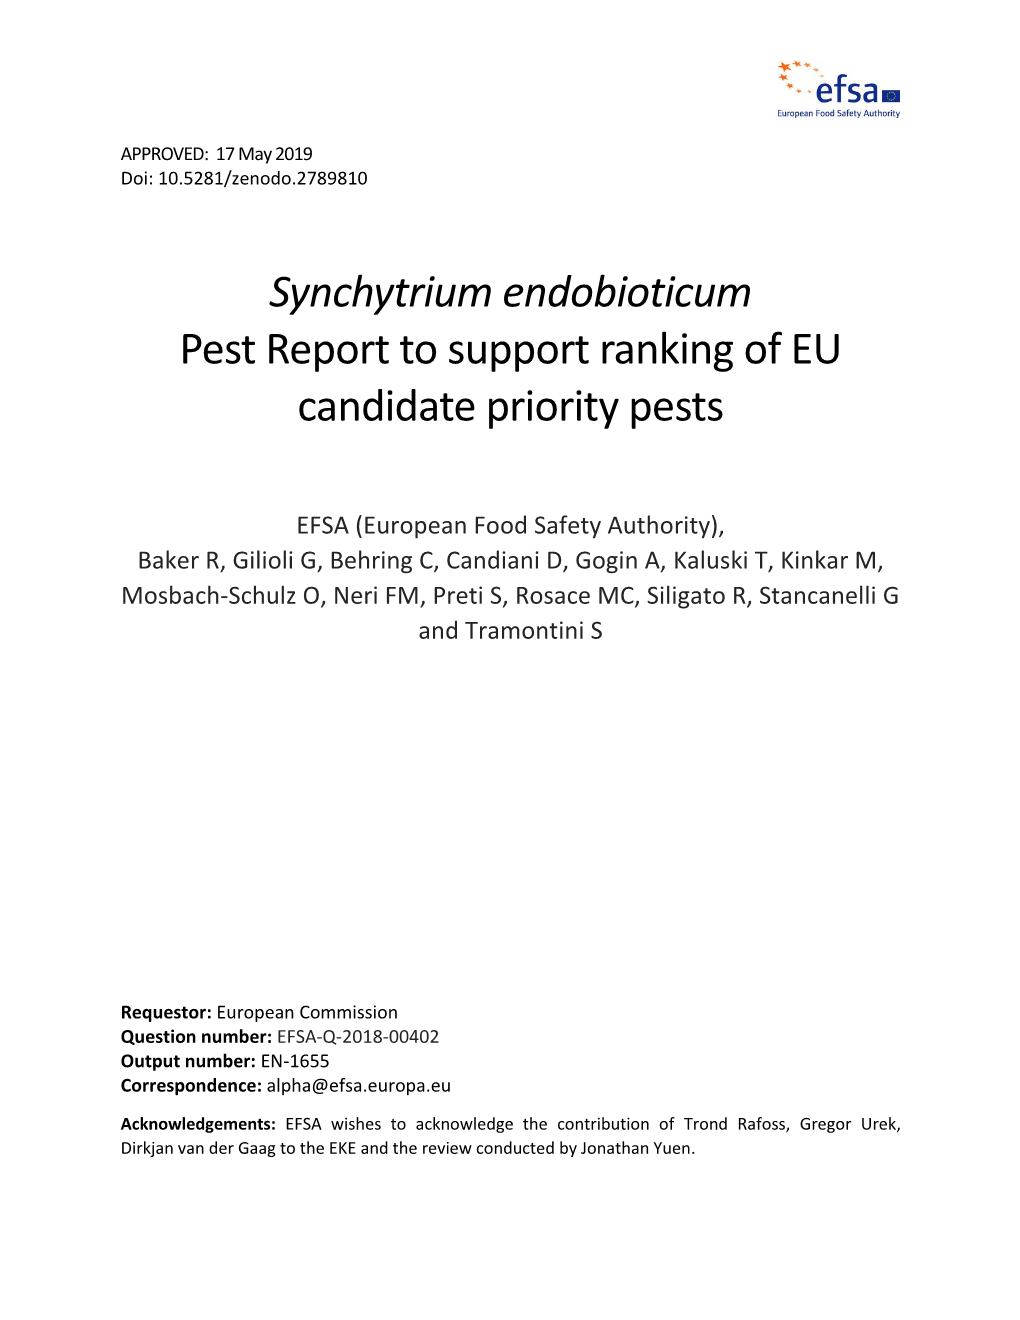 Synchytrium Endobioticum Pest Report to Support Ranking of EU Candidate Priority Pests